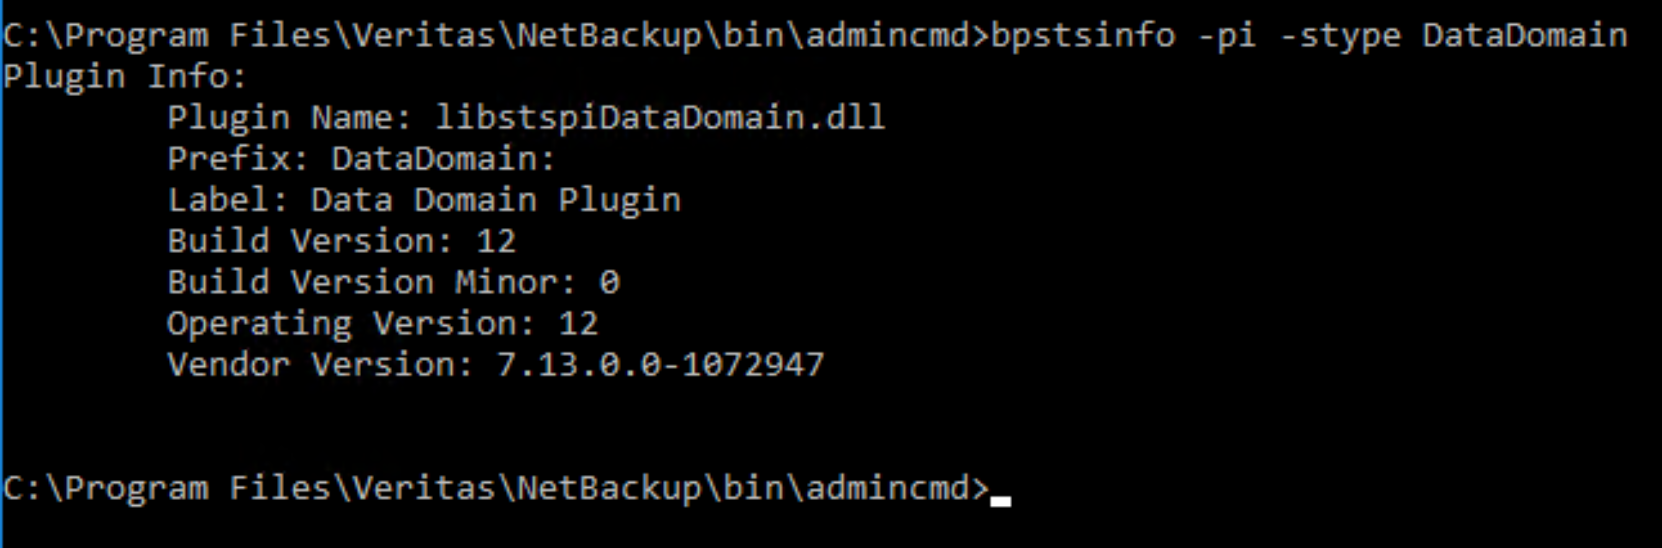 This image shows the command line to verify the plug-in installation